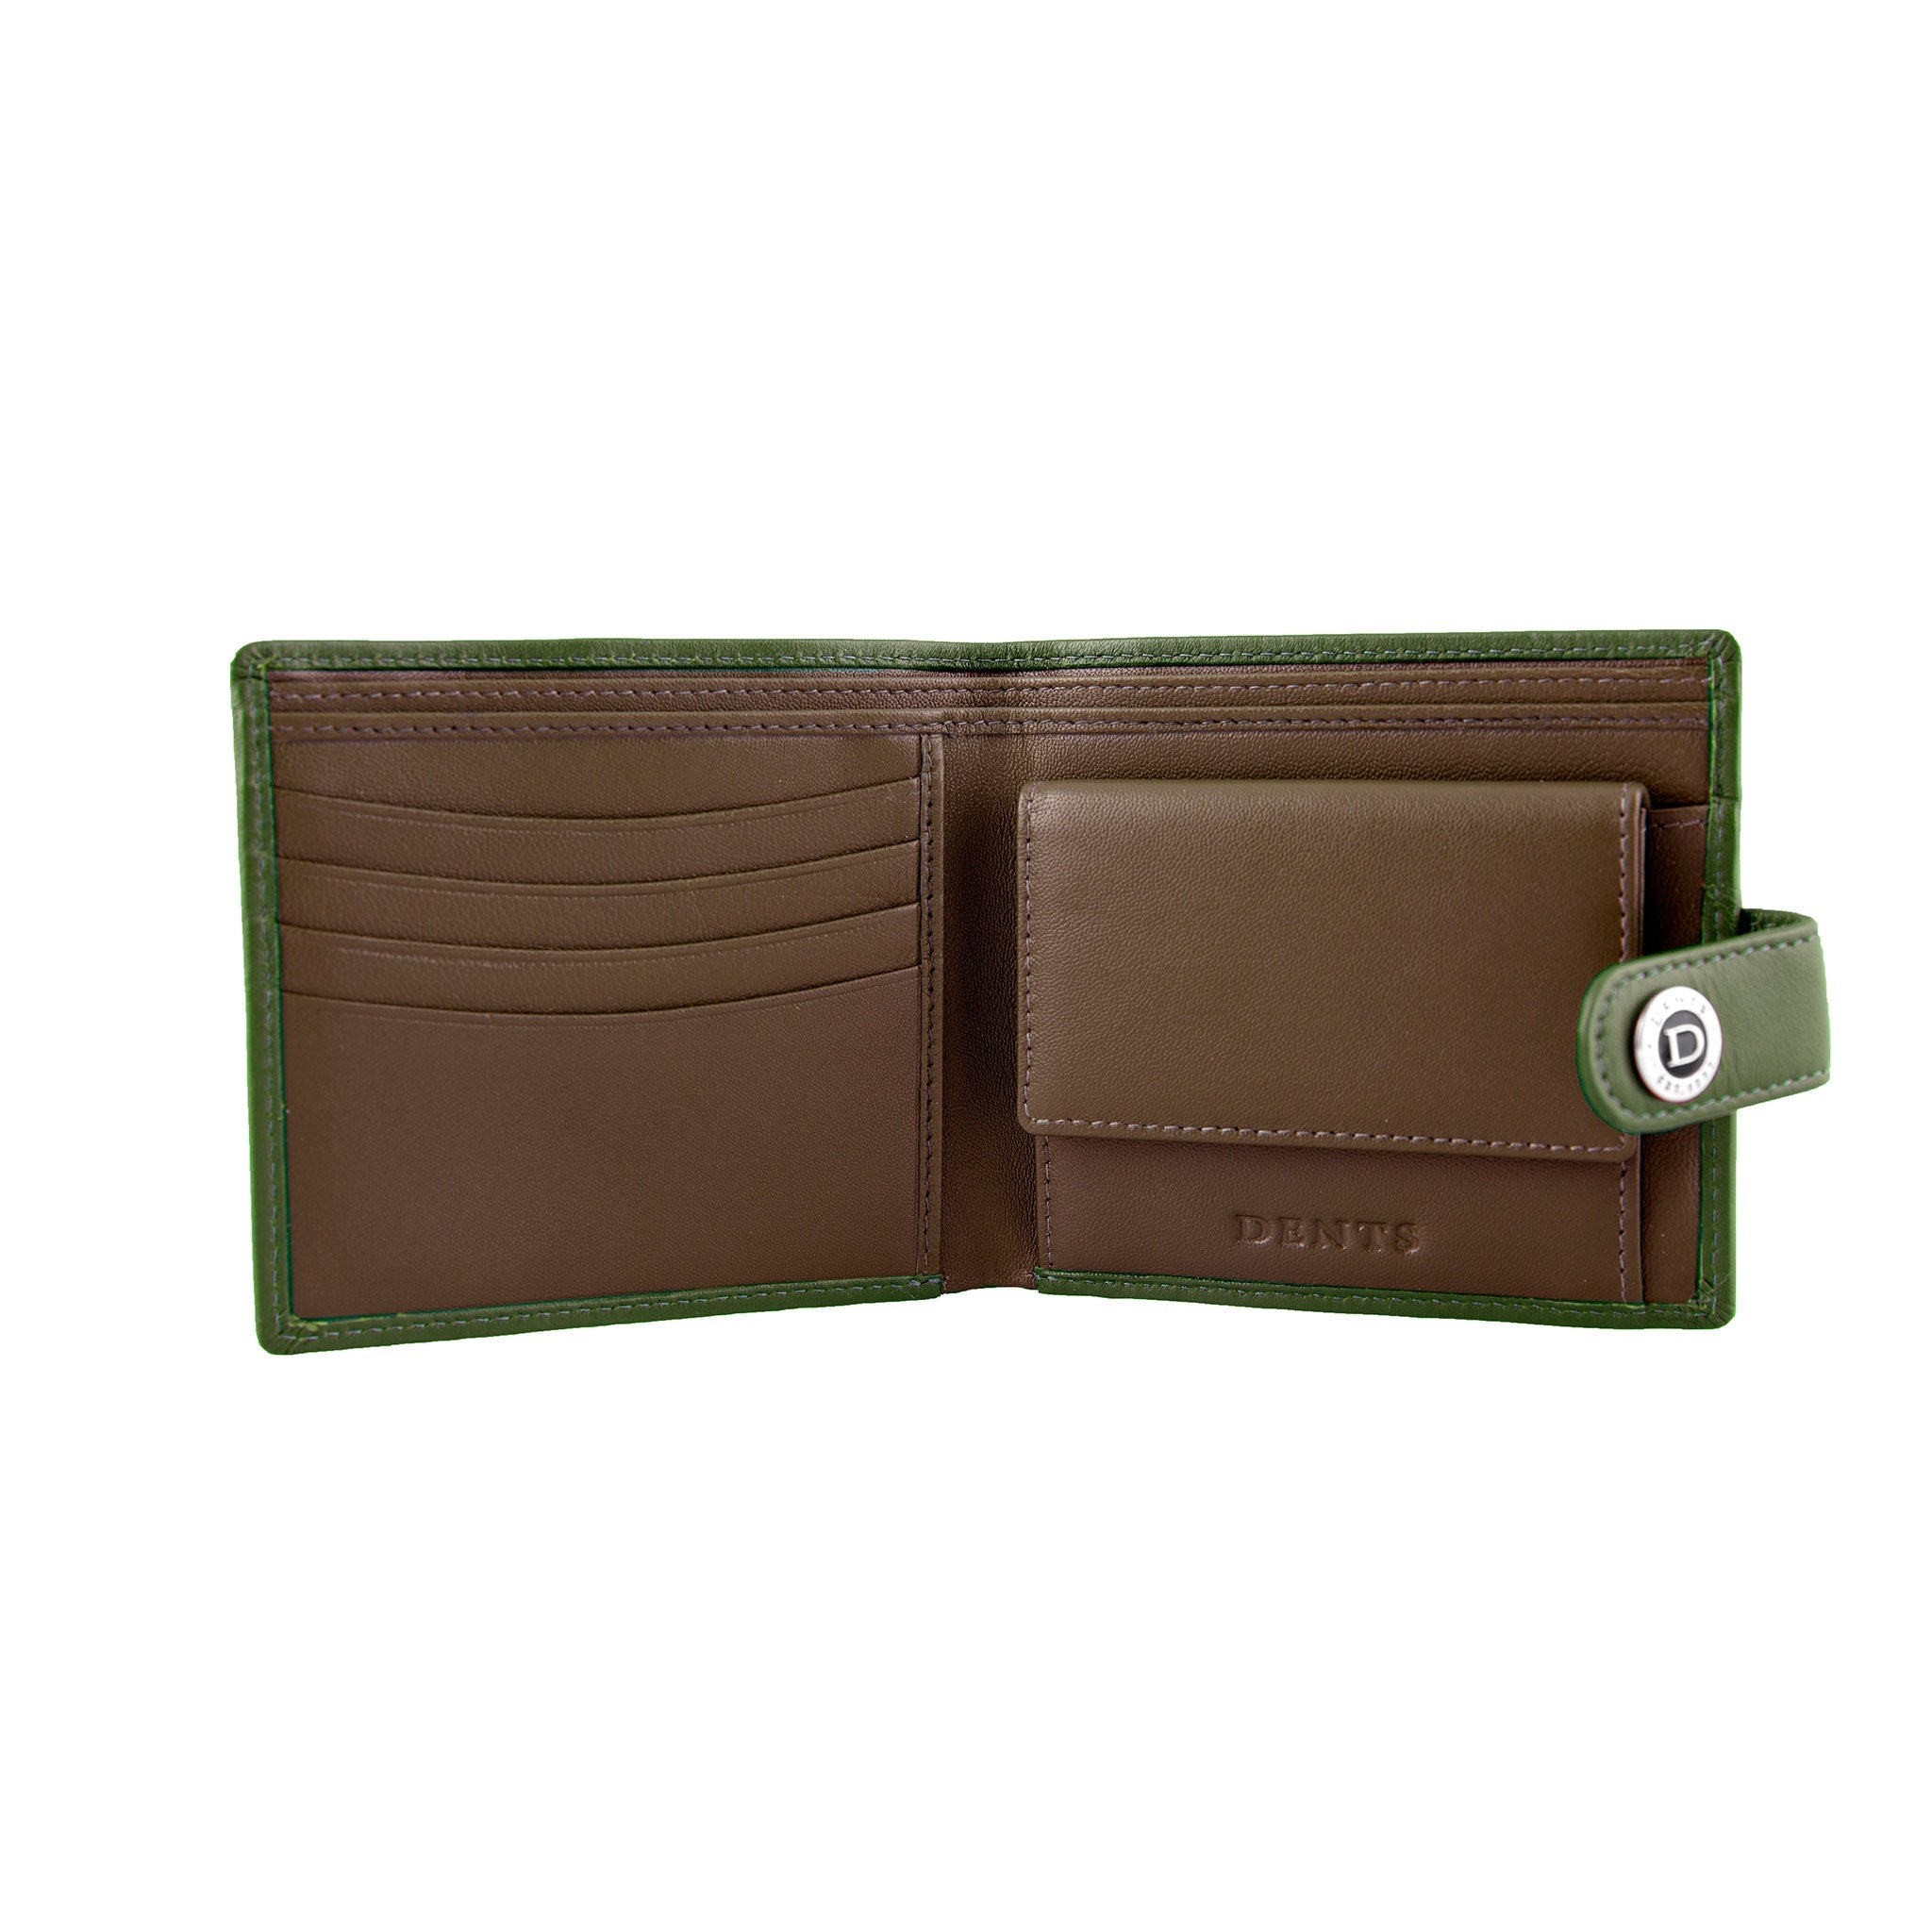 Green leather Wristlet Wallet Handmade in India - Woodland Moss | NOVICA